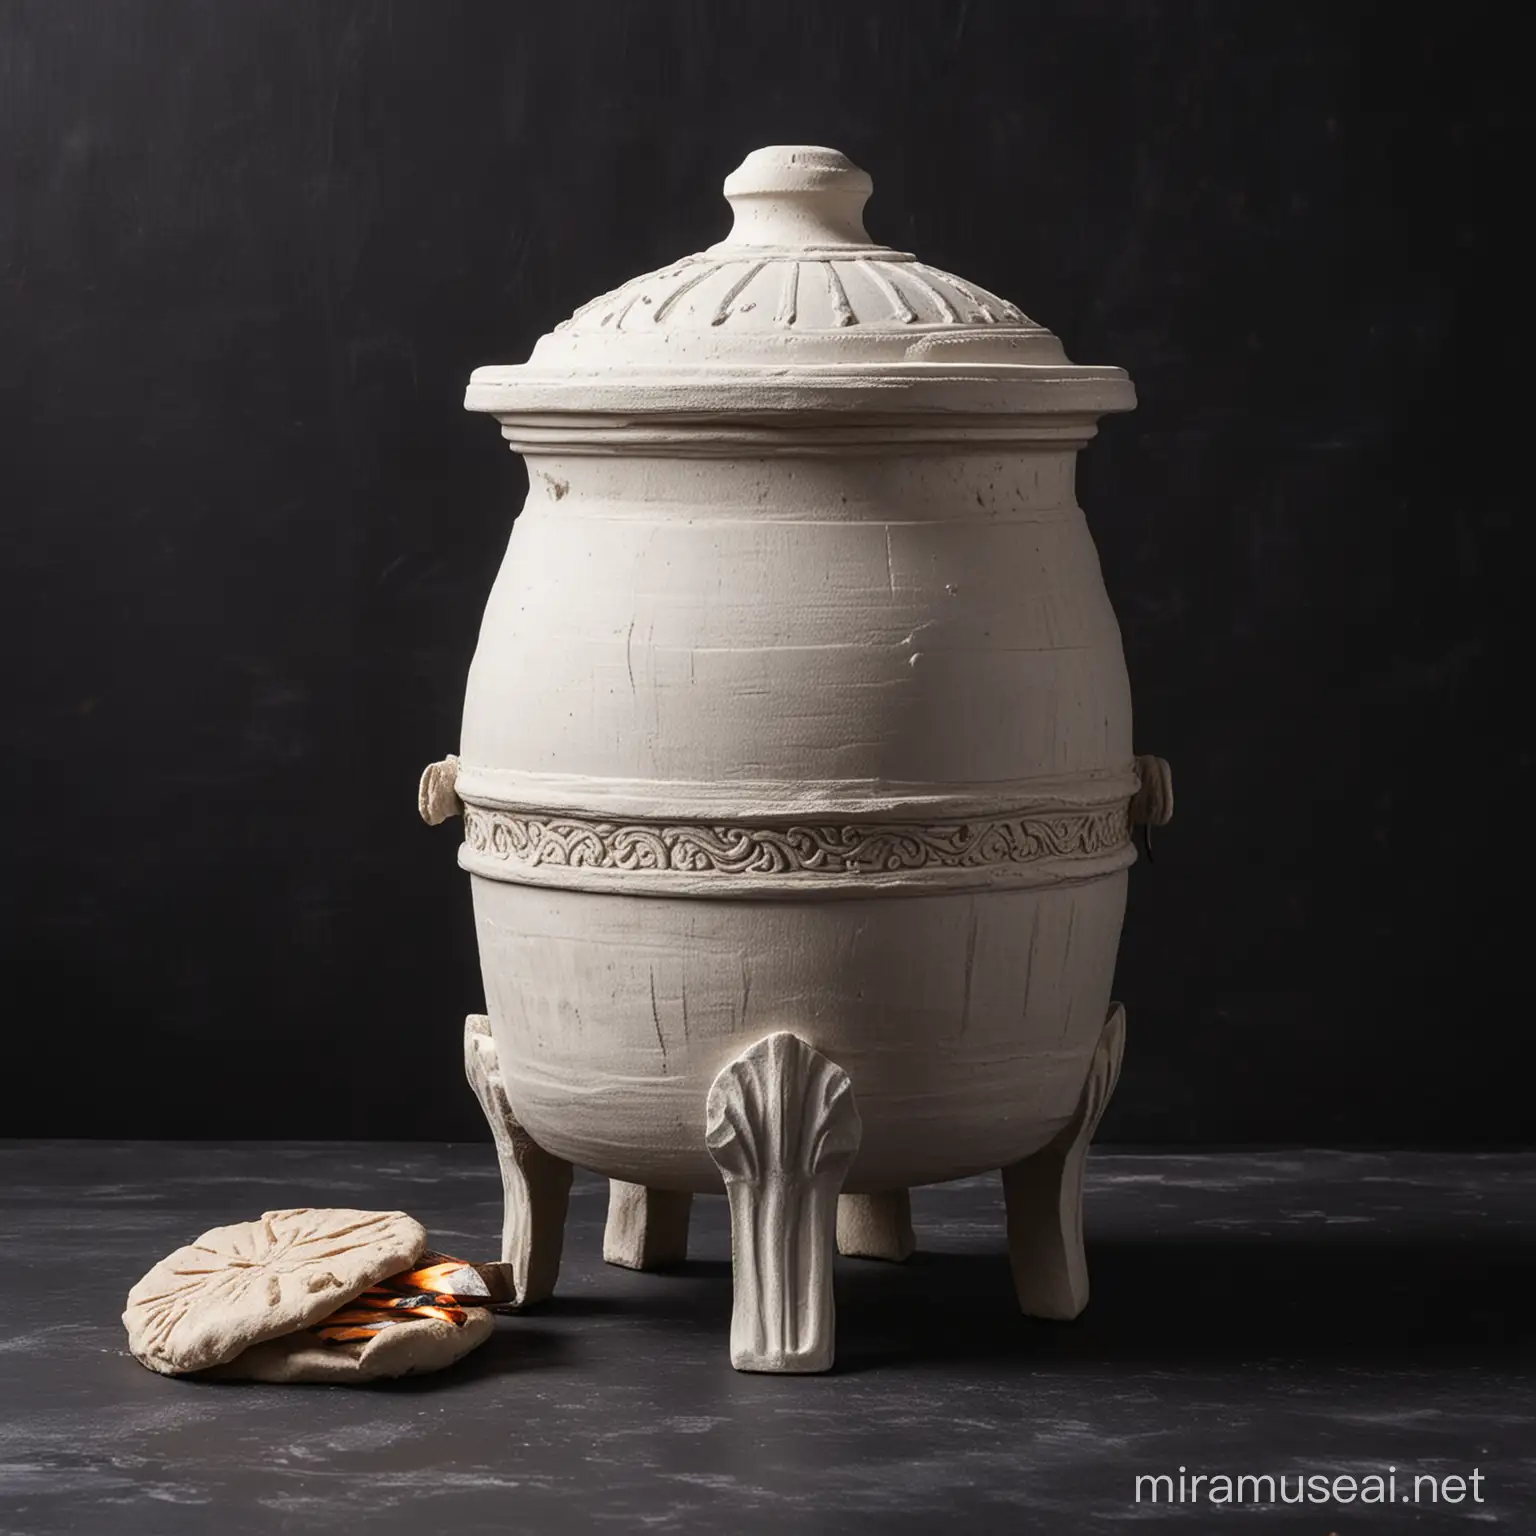 tandoor, beautiful tall, white, stone, on a dark background, with a lid.